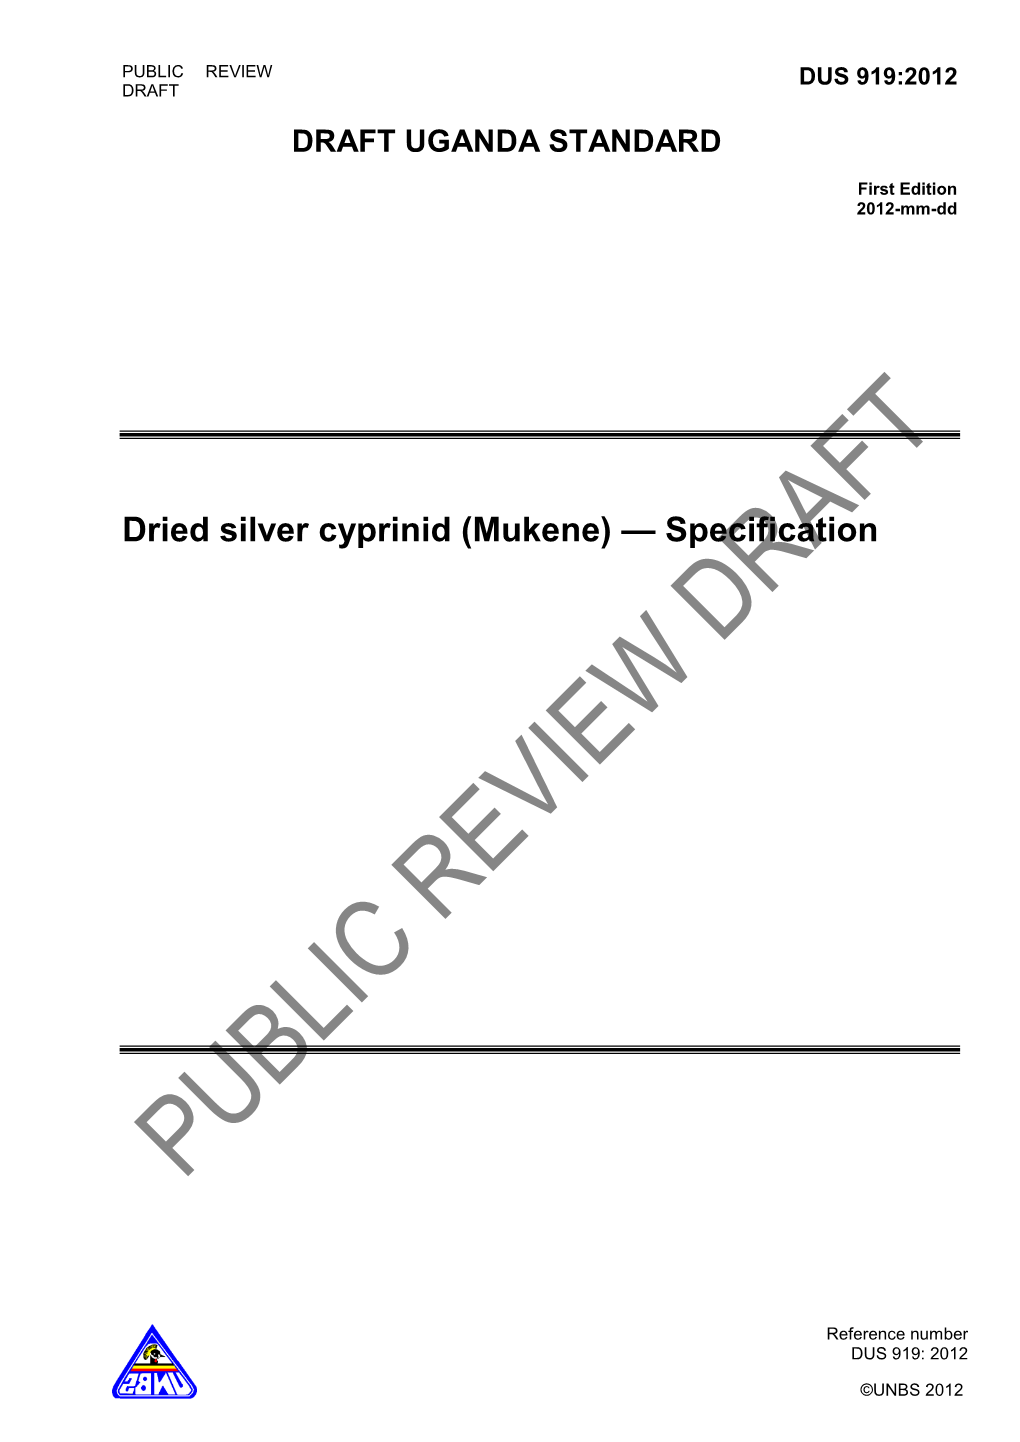 Dried Silver Cyprinid (Mukene) — Specification